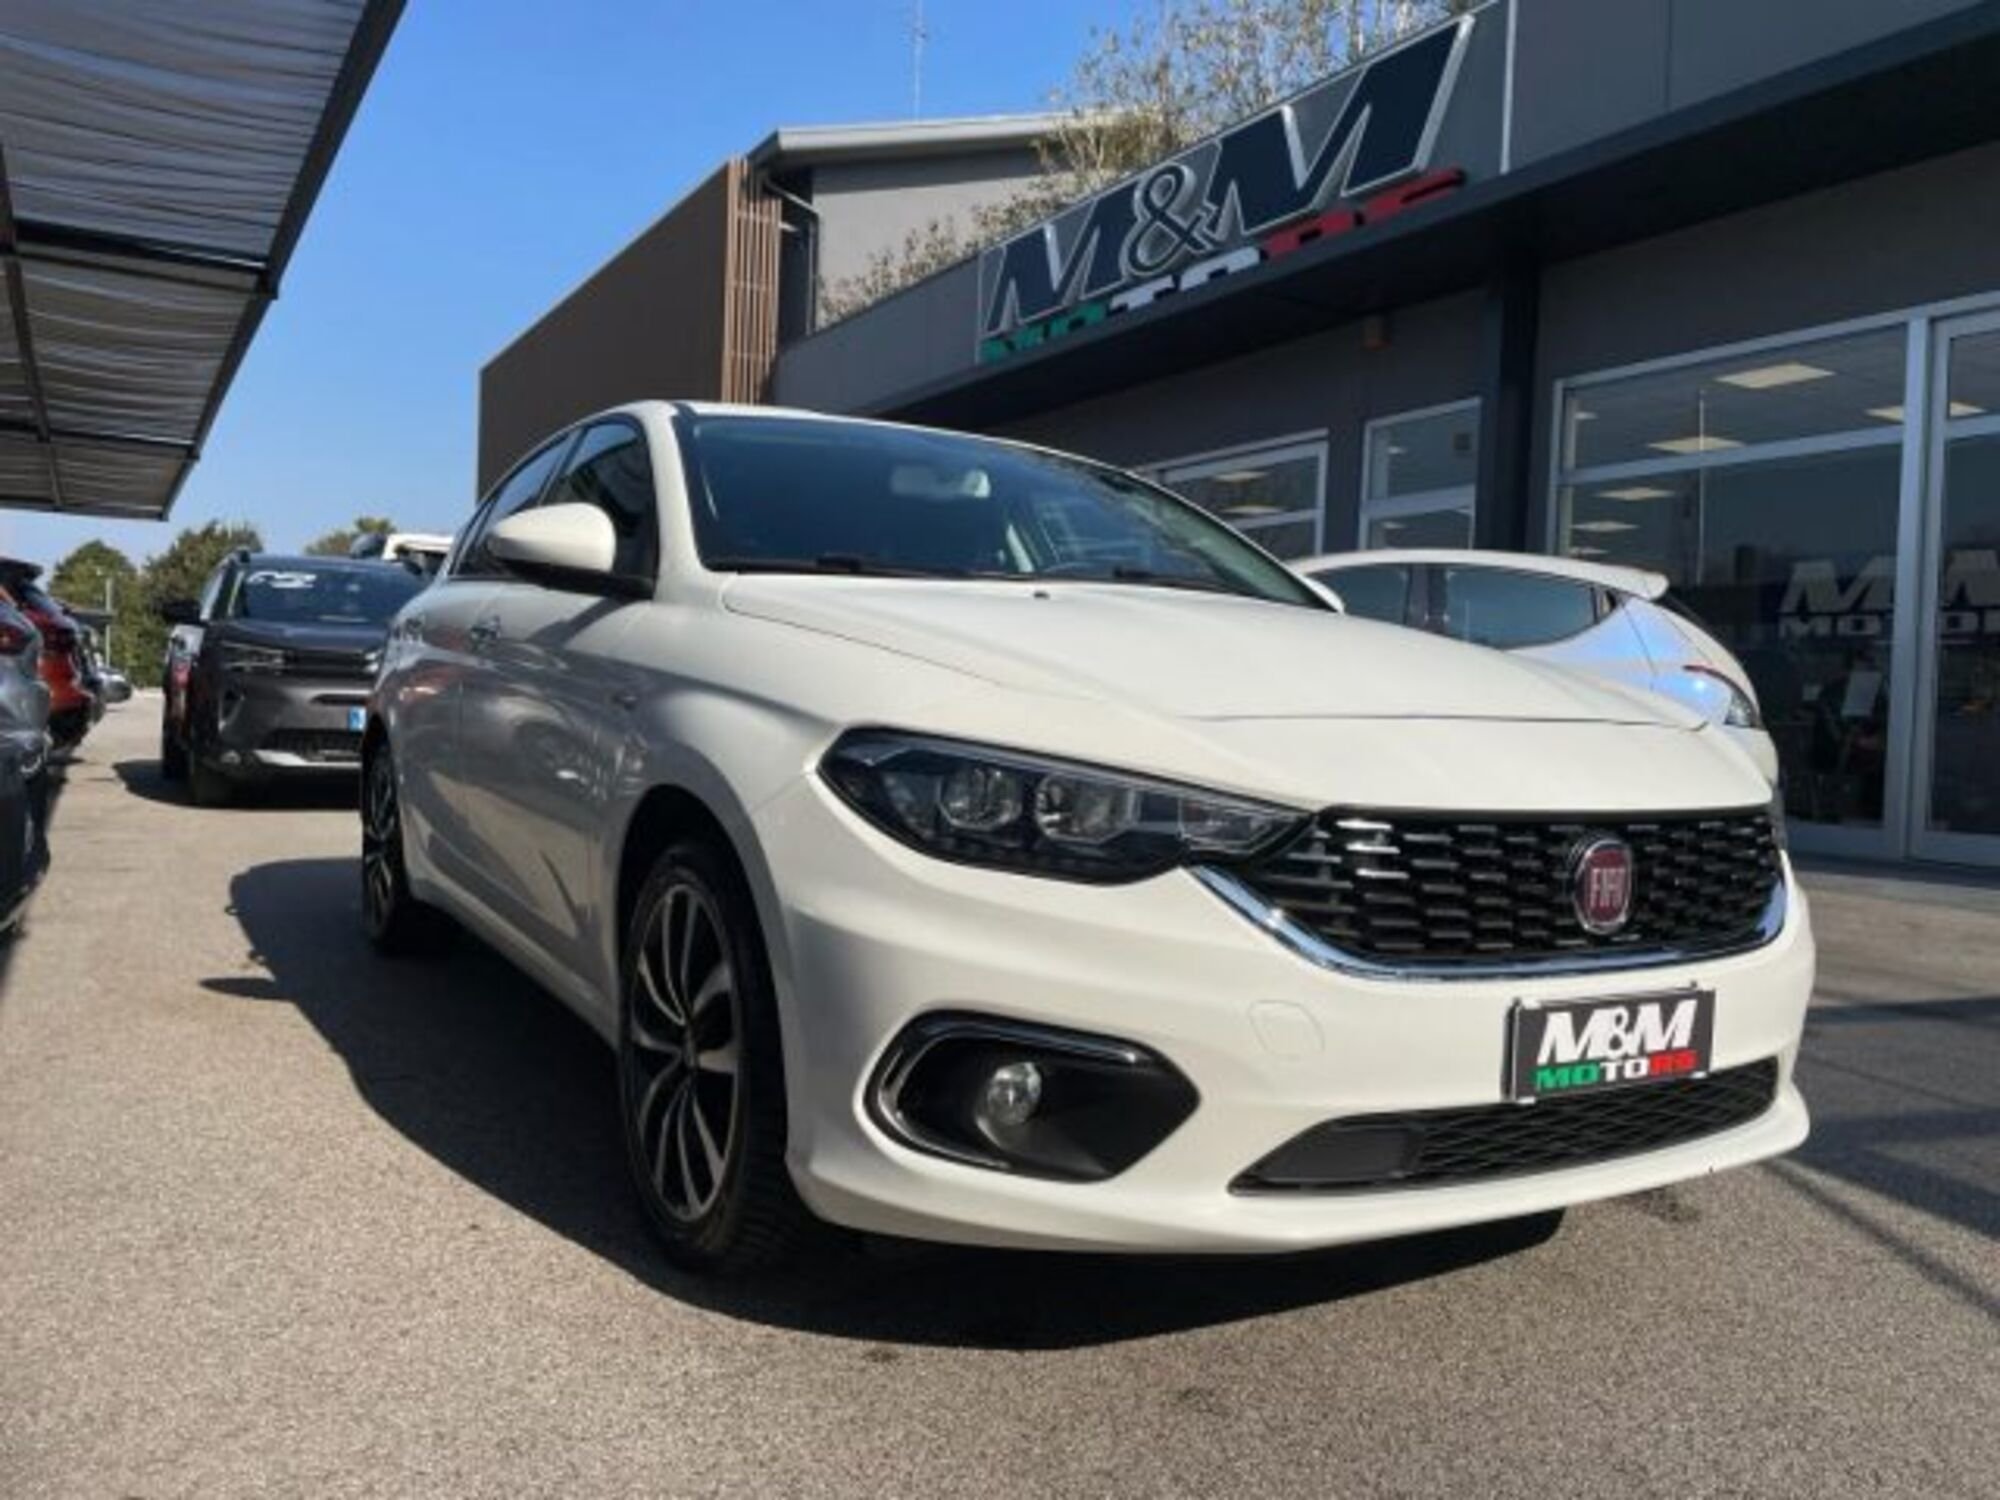 Fiat Tipo Tipo 1.6 Mjt S&S DCT 5 porte Lounge 